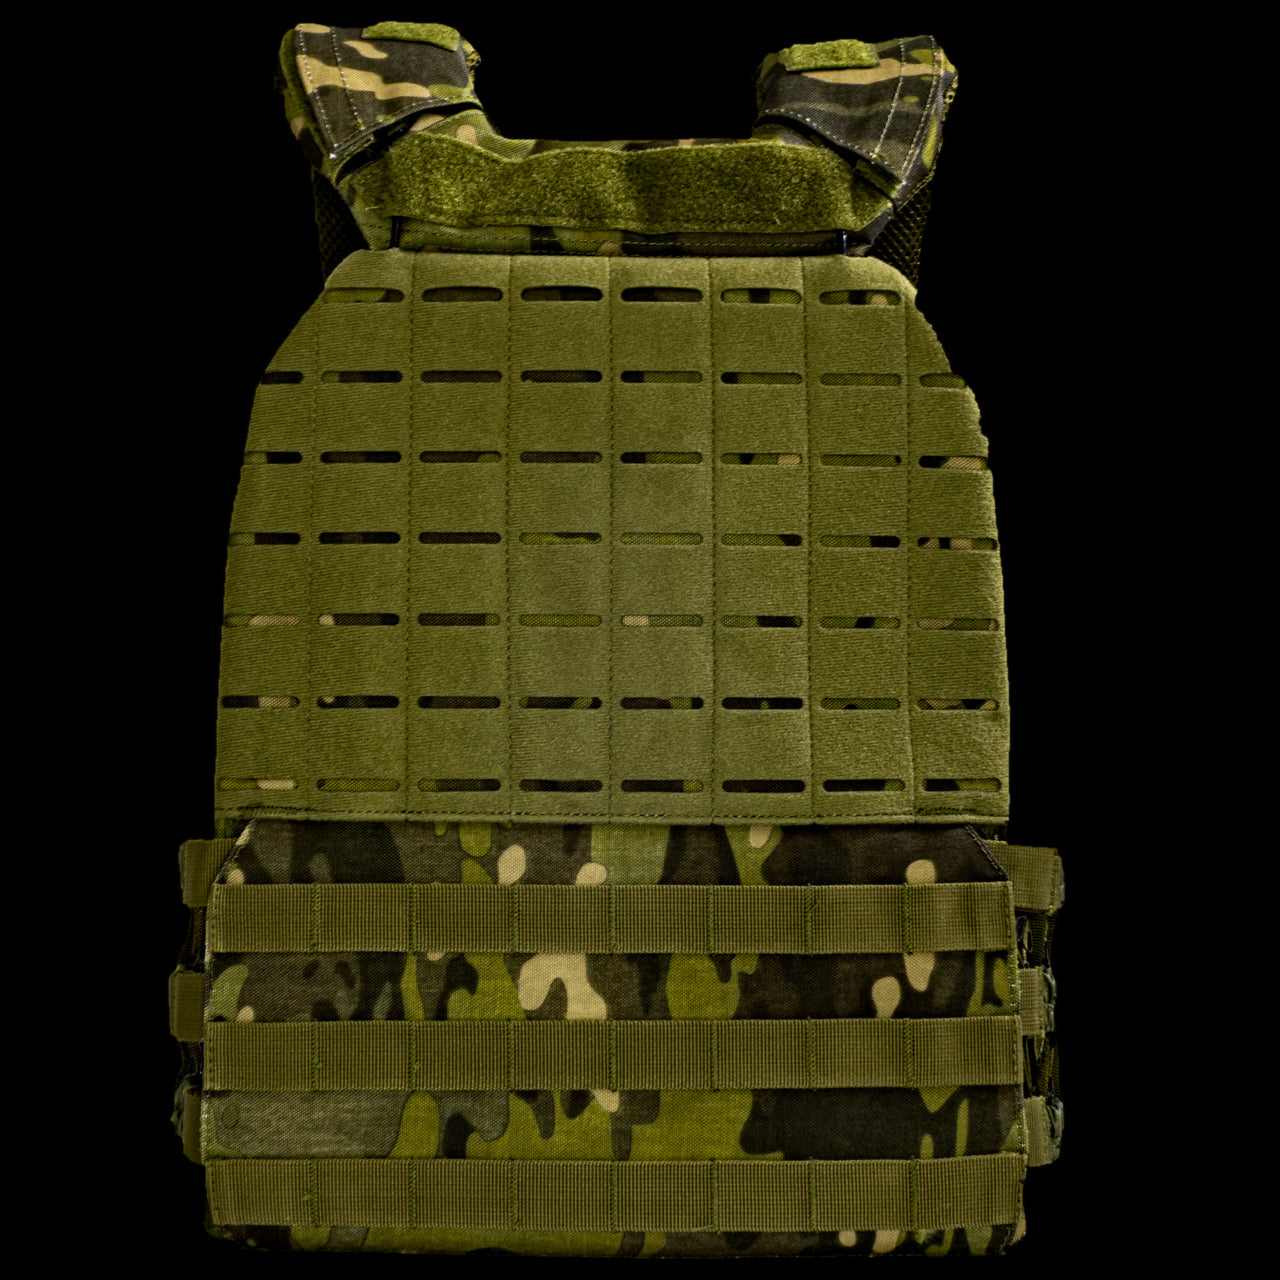 FORT Plate Carrier - FORTITUDE WORKS SINGAPORE